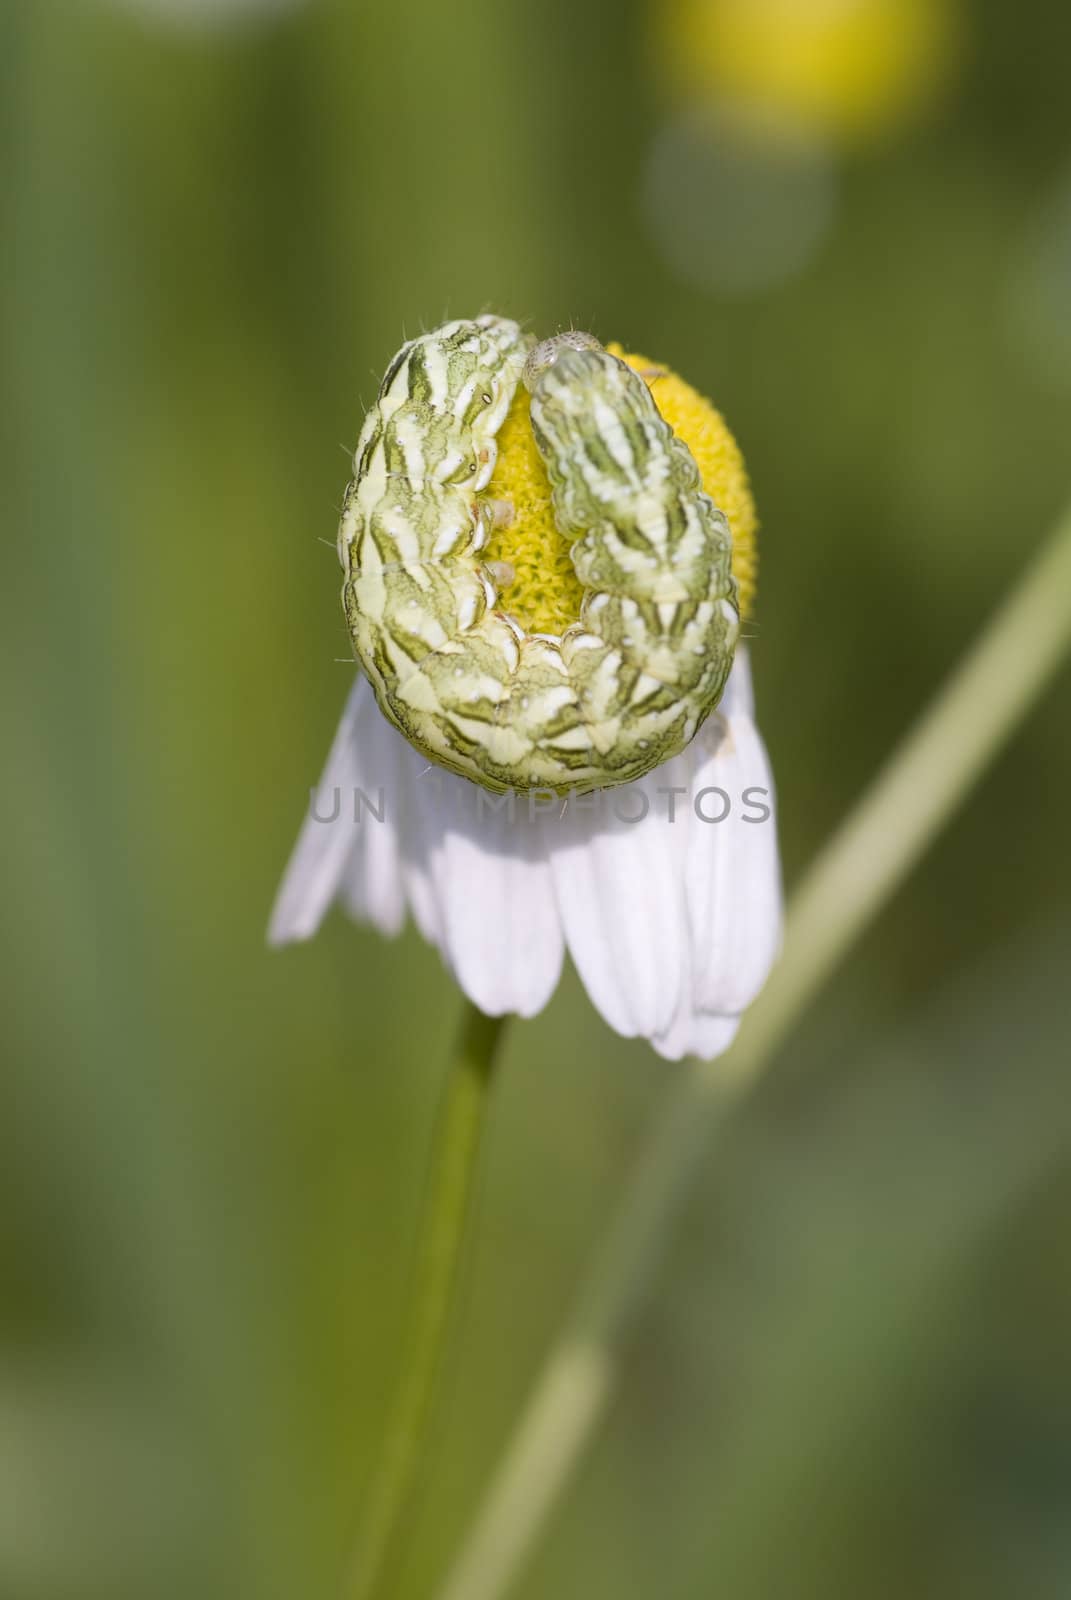 caterpillar green striped hangs on flower camomile